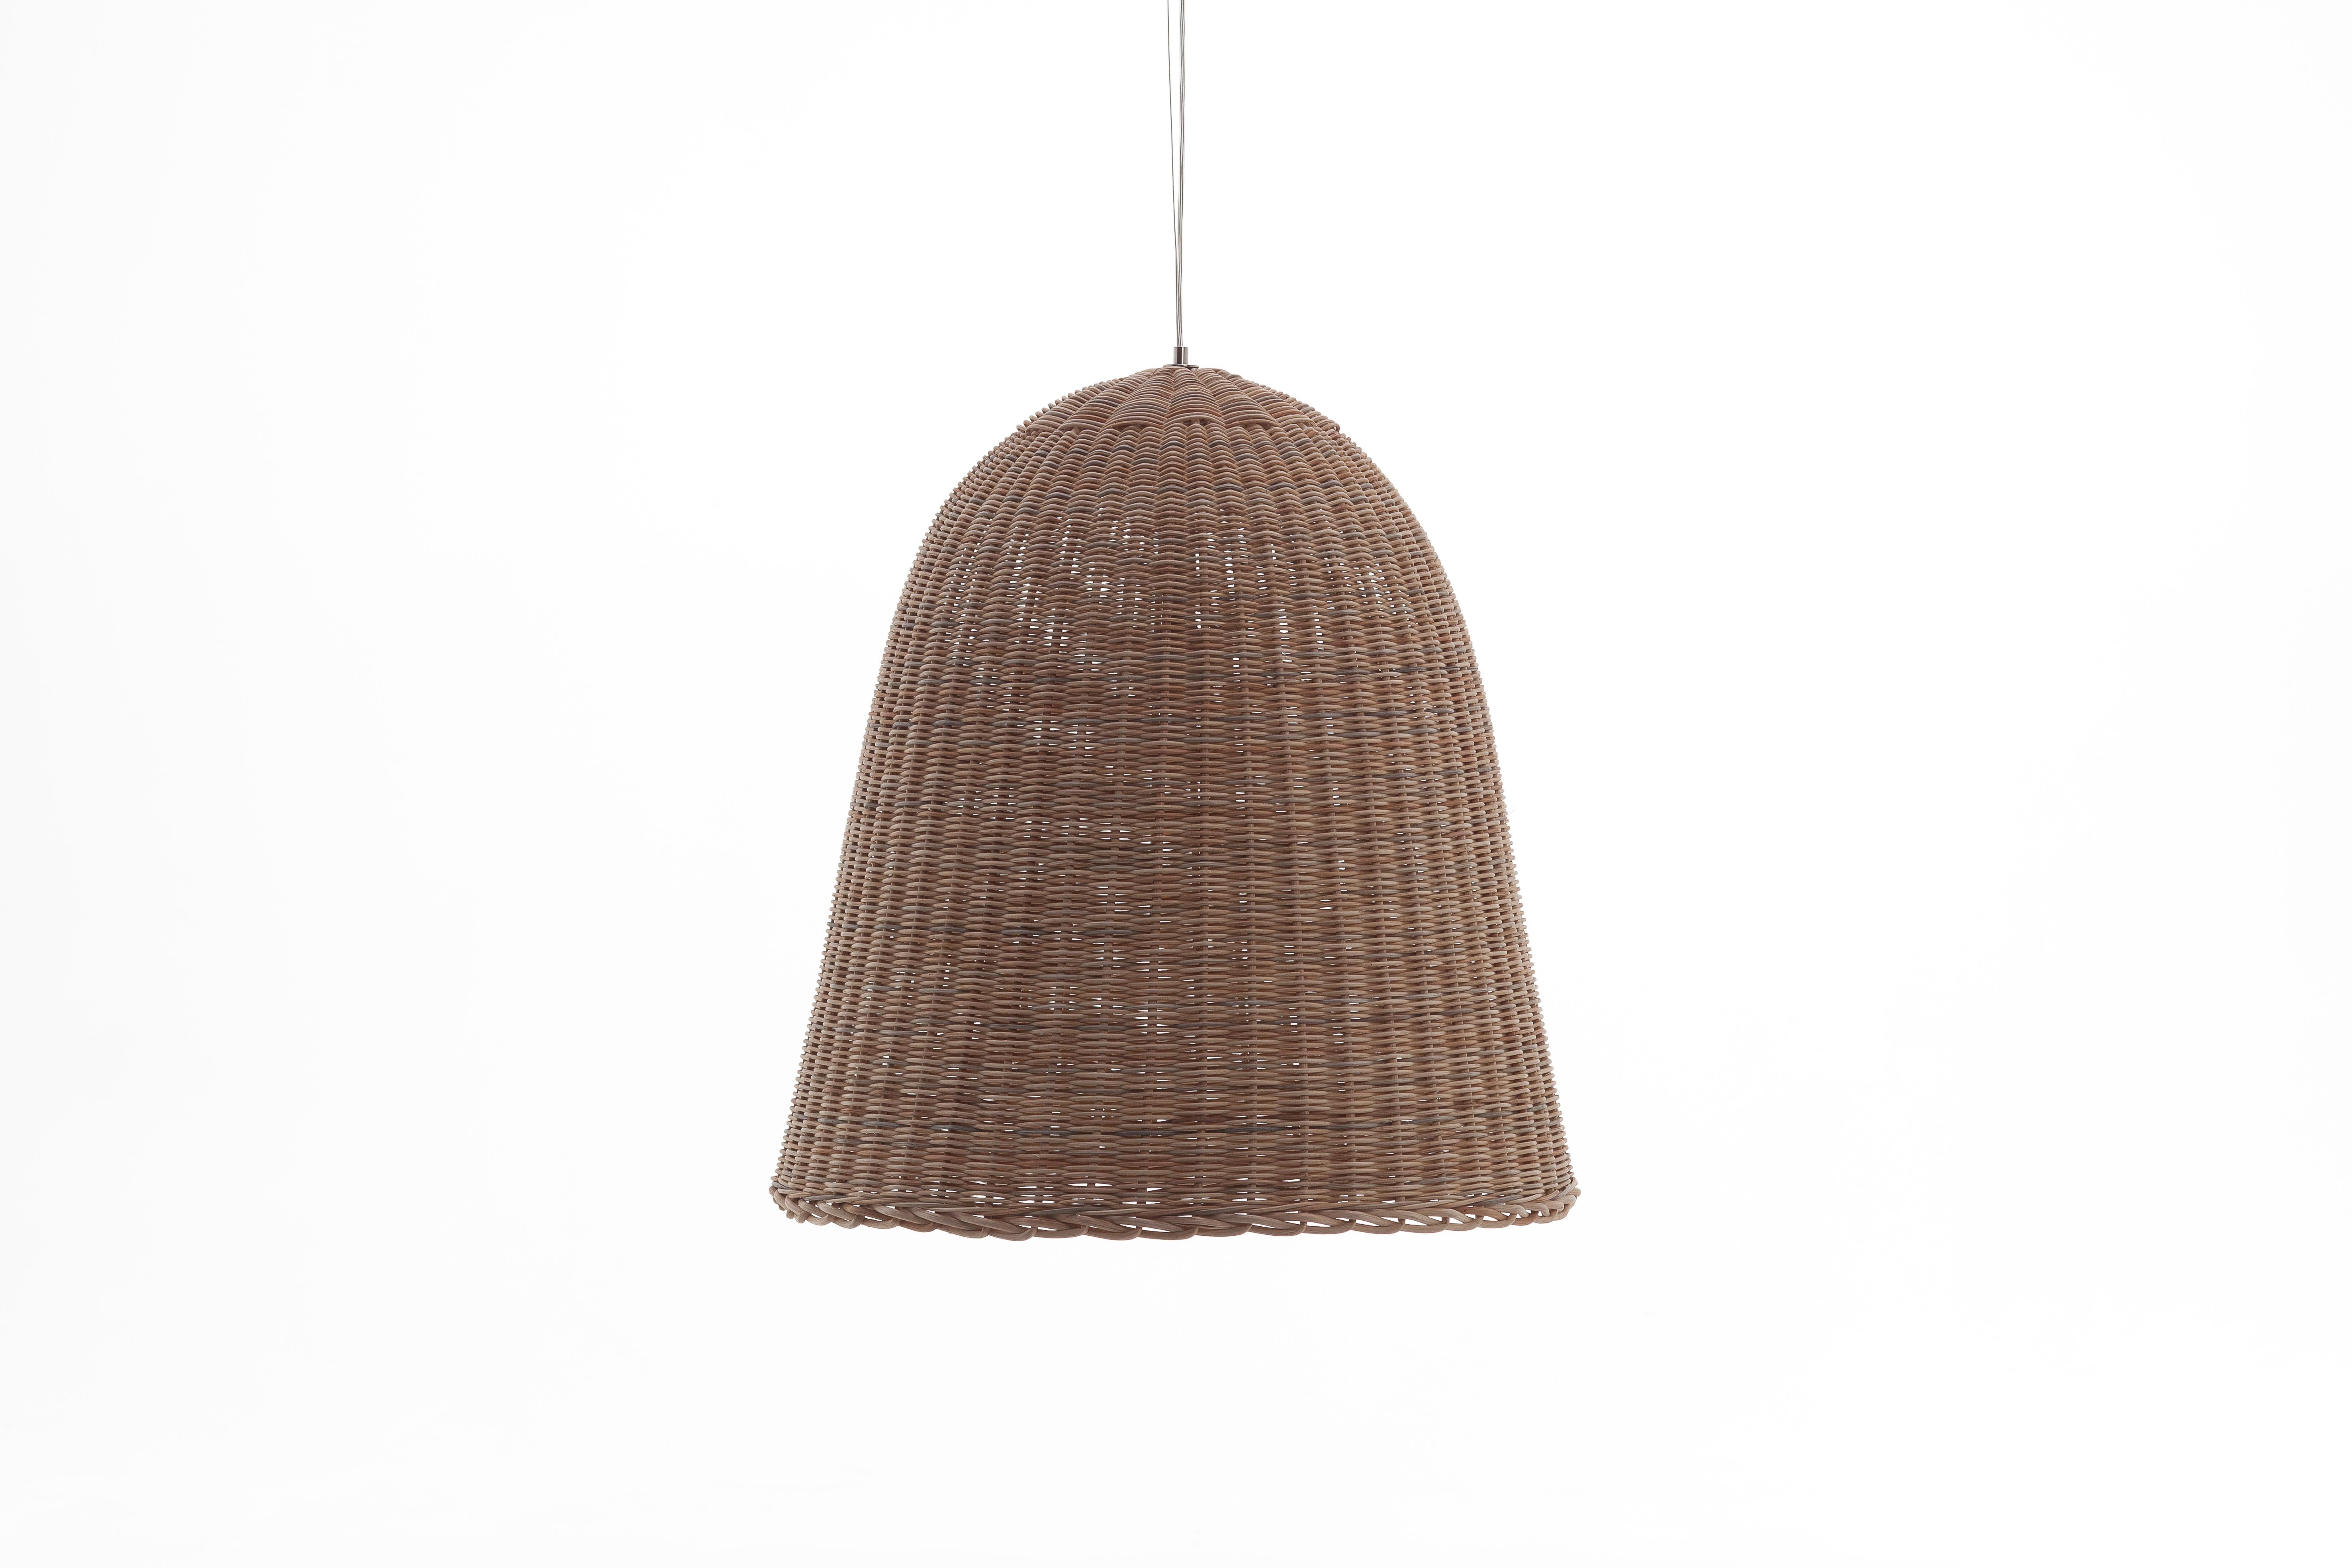 The charm of natural materials makes the Bell suspension lamp made of hand-woven wicker unique. A product that refers to exotic suggestions, recovering a traditional process reinterpreted in a contemporary style, which can be used individually or in